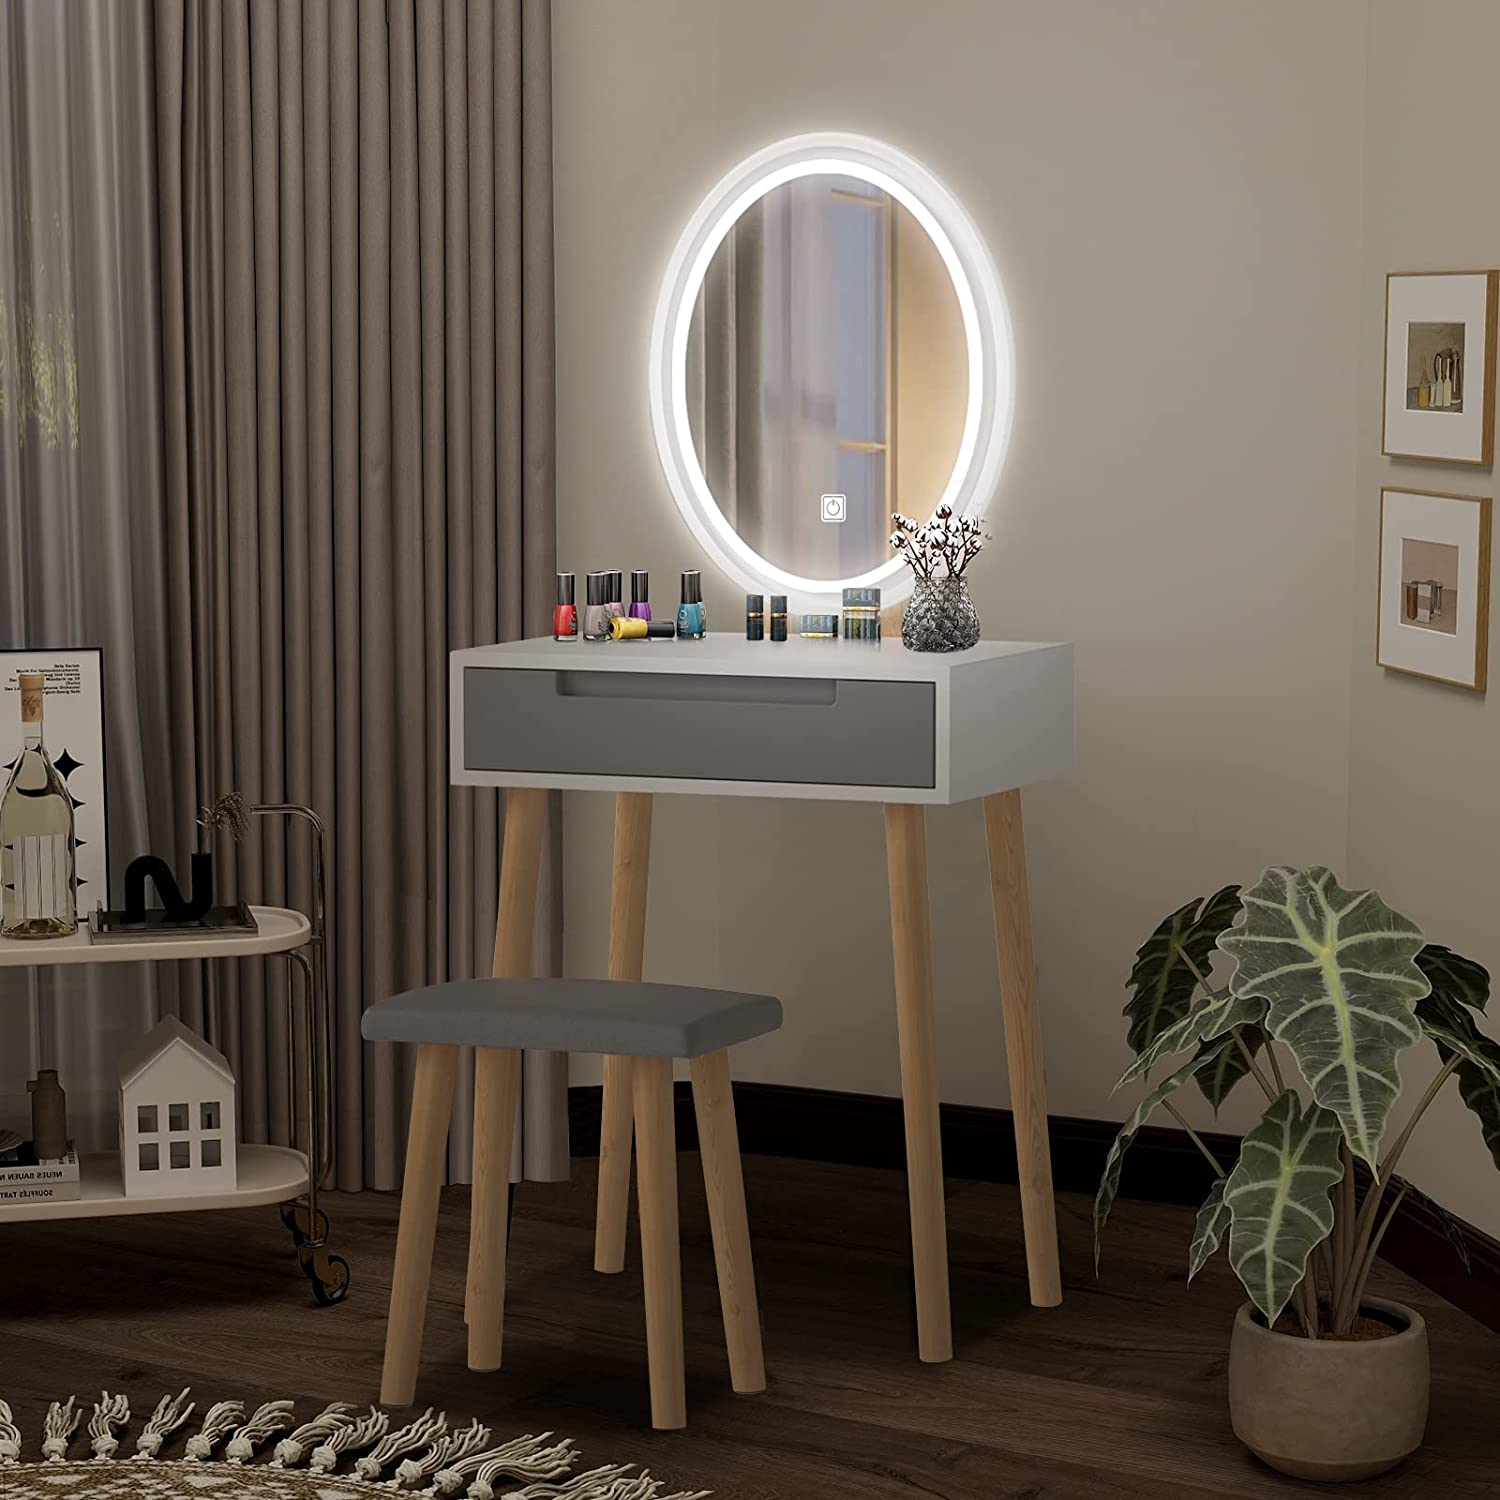 Makeup Vanity Table Set with Stool HW1151 and lighting mirror